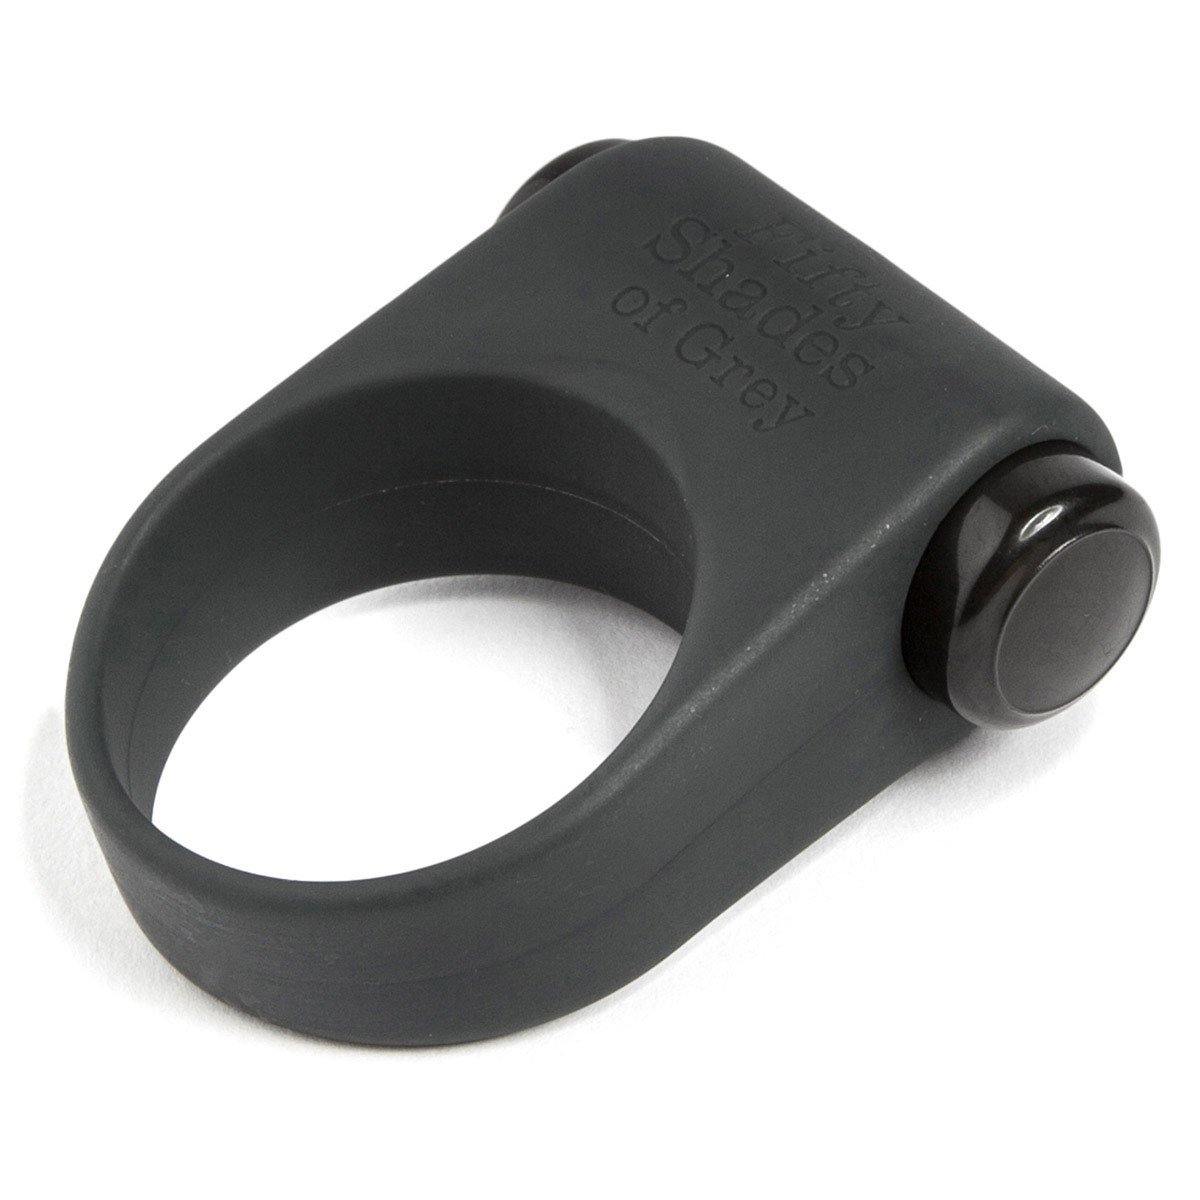 Fifty Shades Feel It, Baby! Vibrating C-Ring - Buy At Luxury Toy X - Free 3-Day Shipping